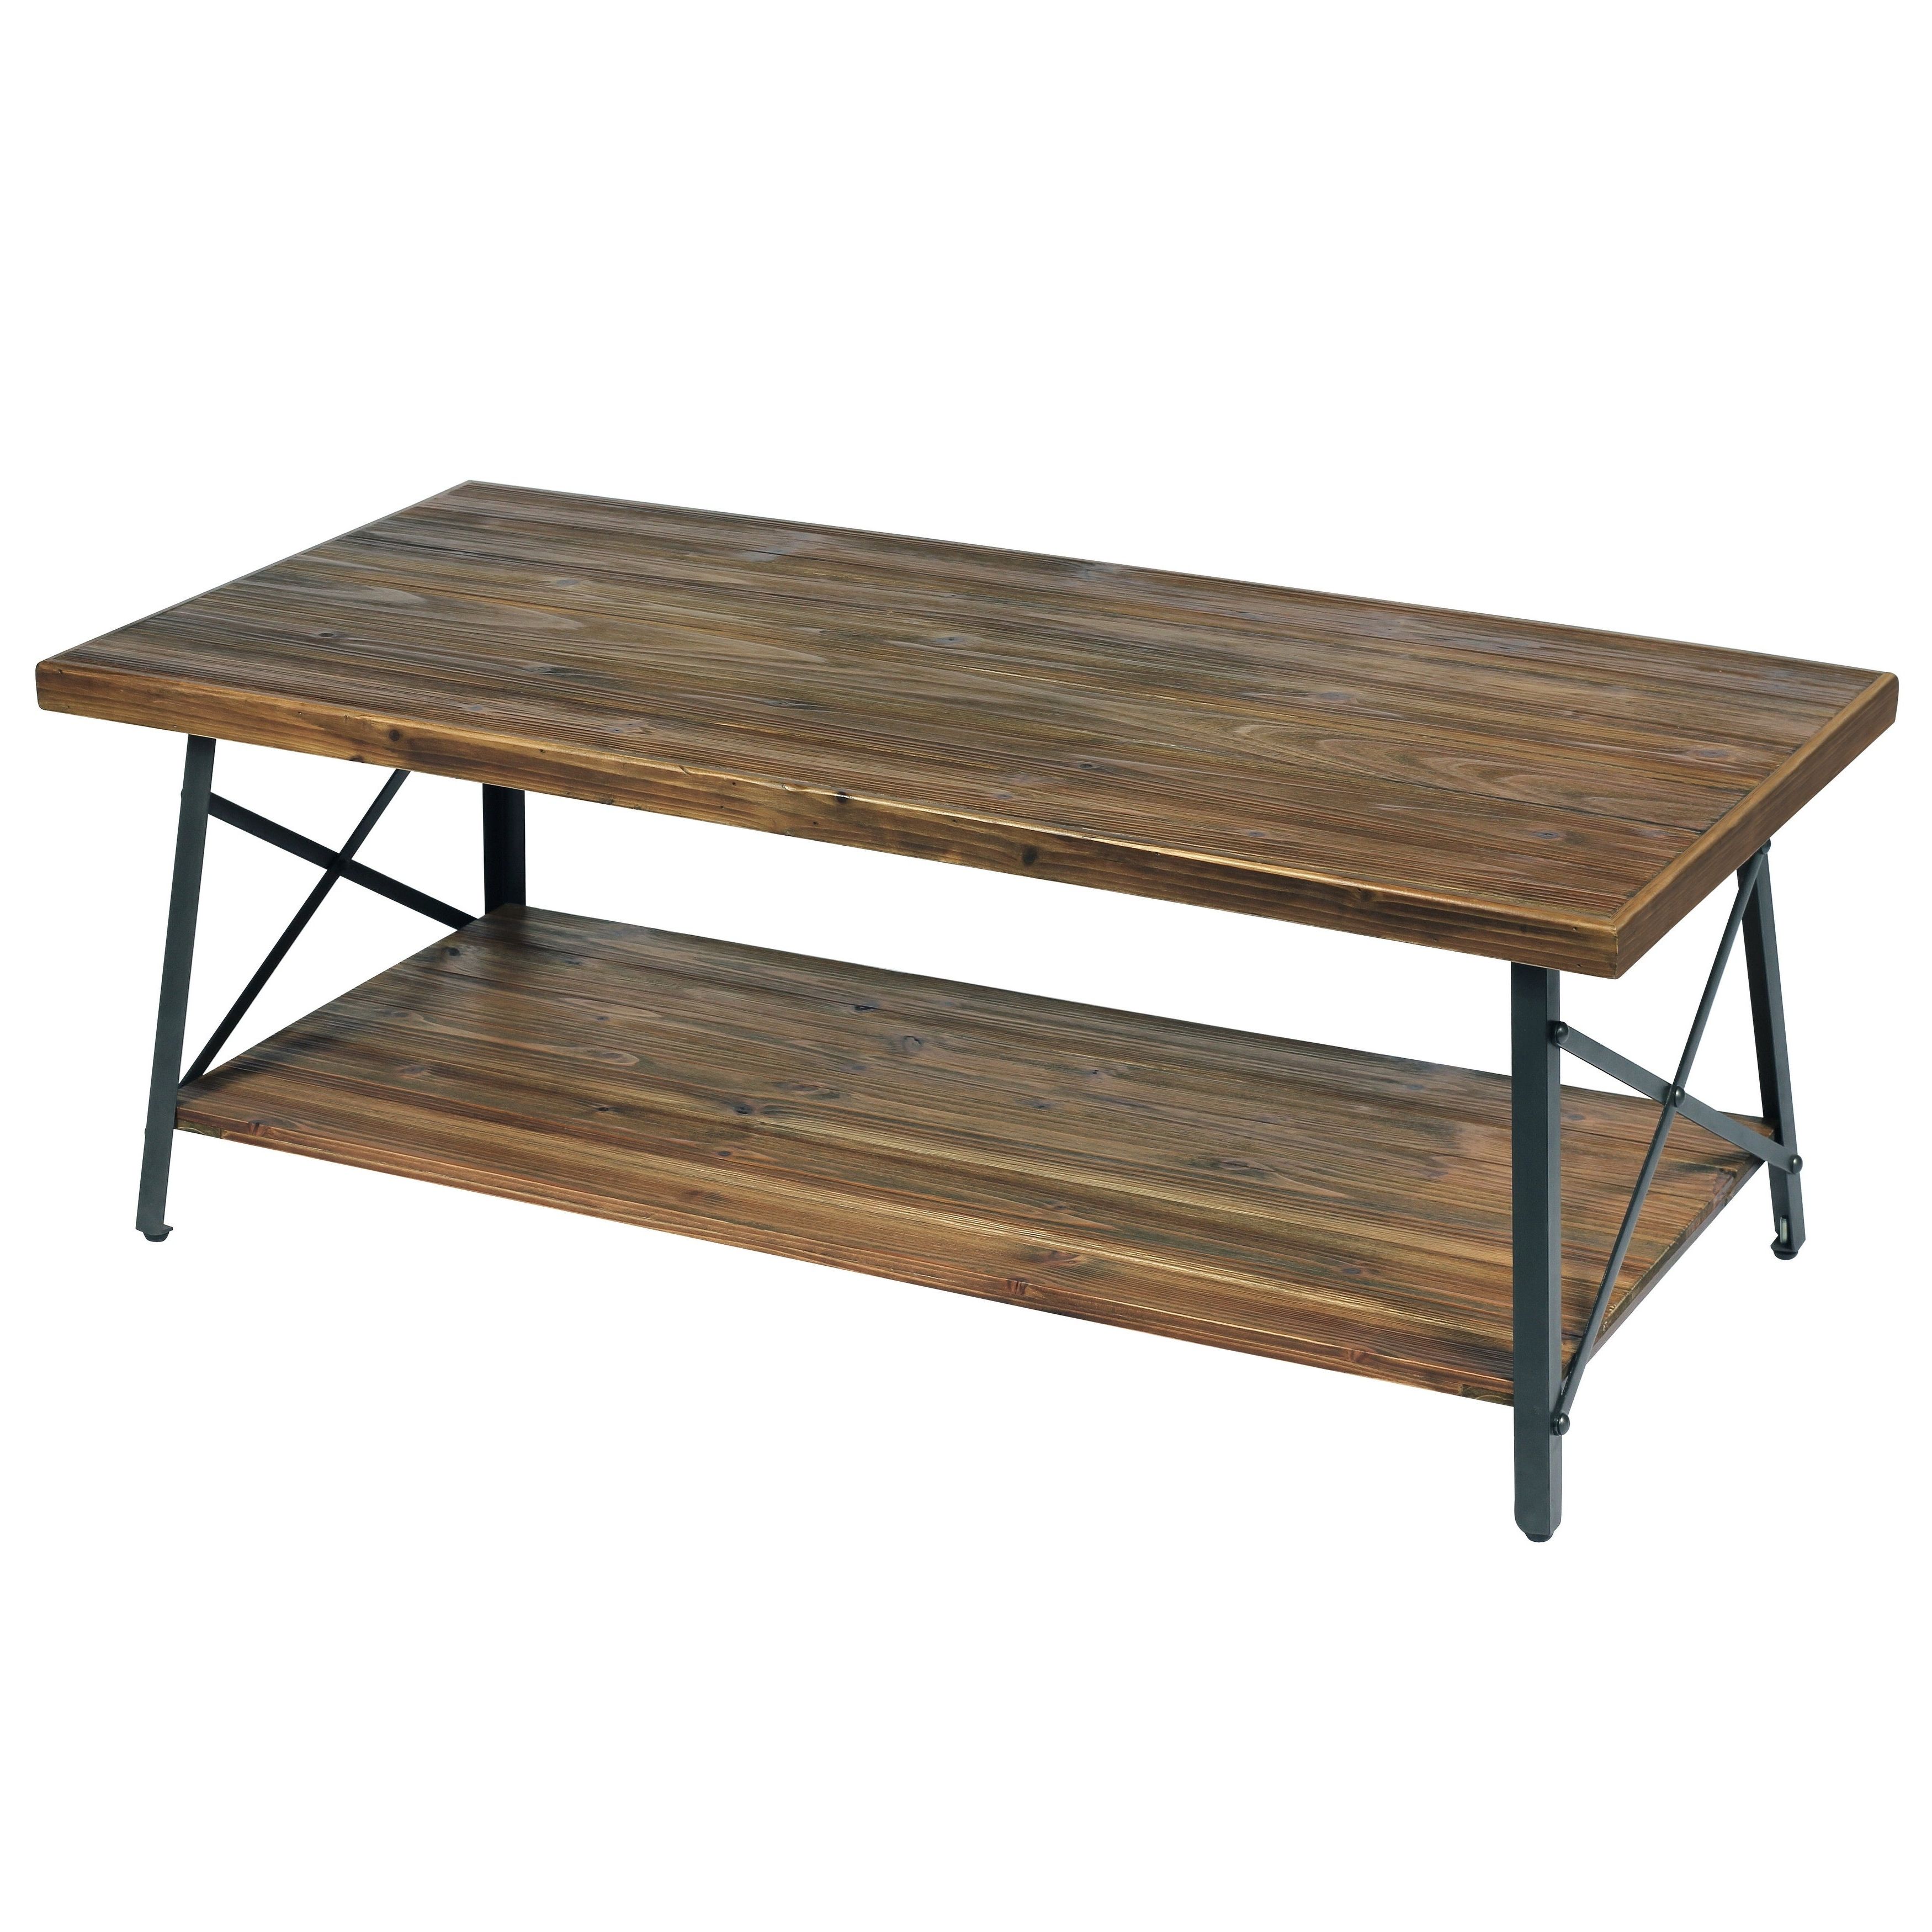 Carbon Loft Oliver Modern Rustic Natural Fir Coffee Table For Most Popular Carbon Loft Enjolras Wood Steel Coffee Tables (View 8 of 20)